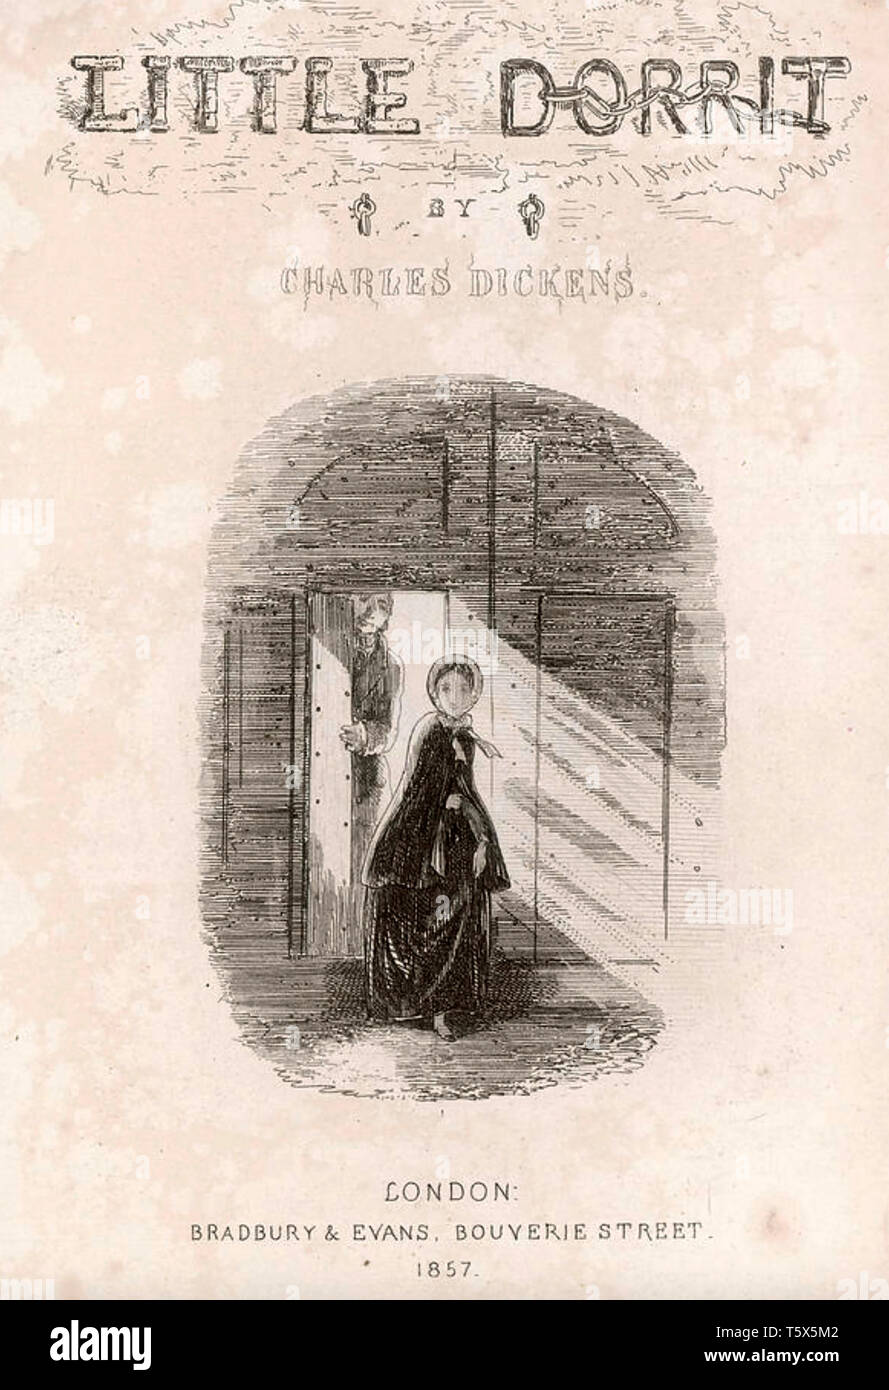 LITTLE DORRIT  Frontespiece of 1856 book by Charles Dickens Stock Photo